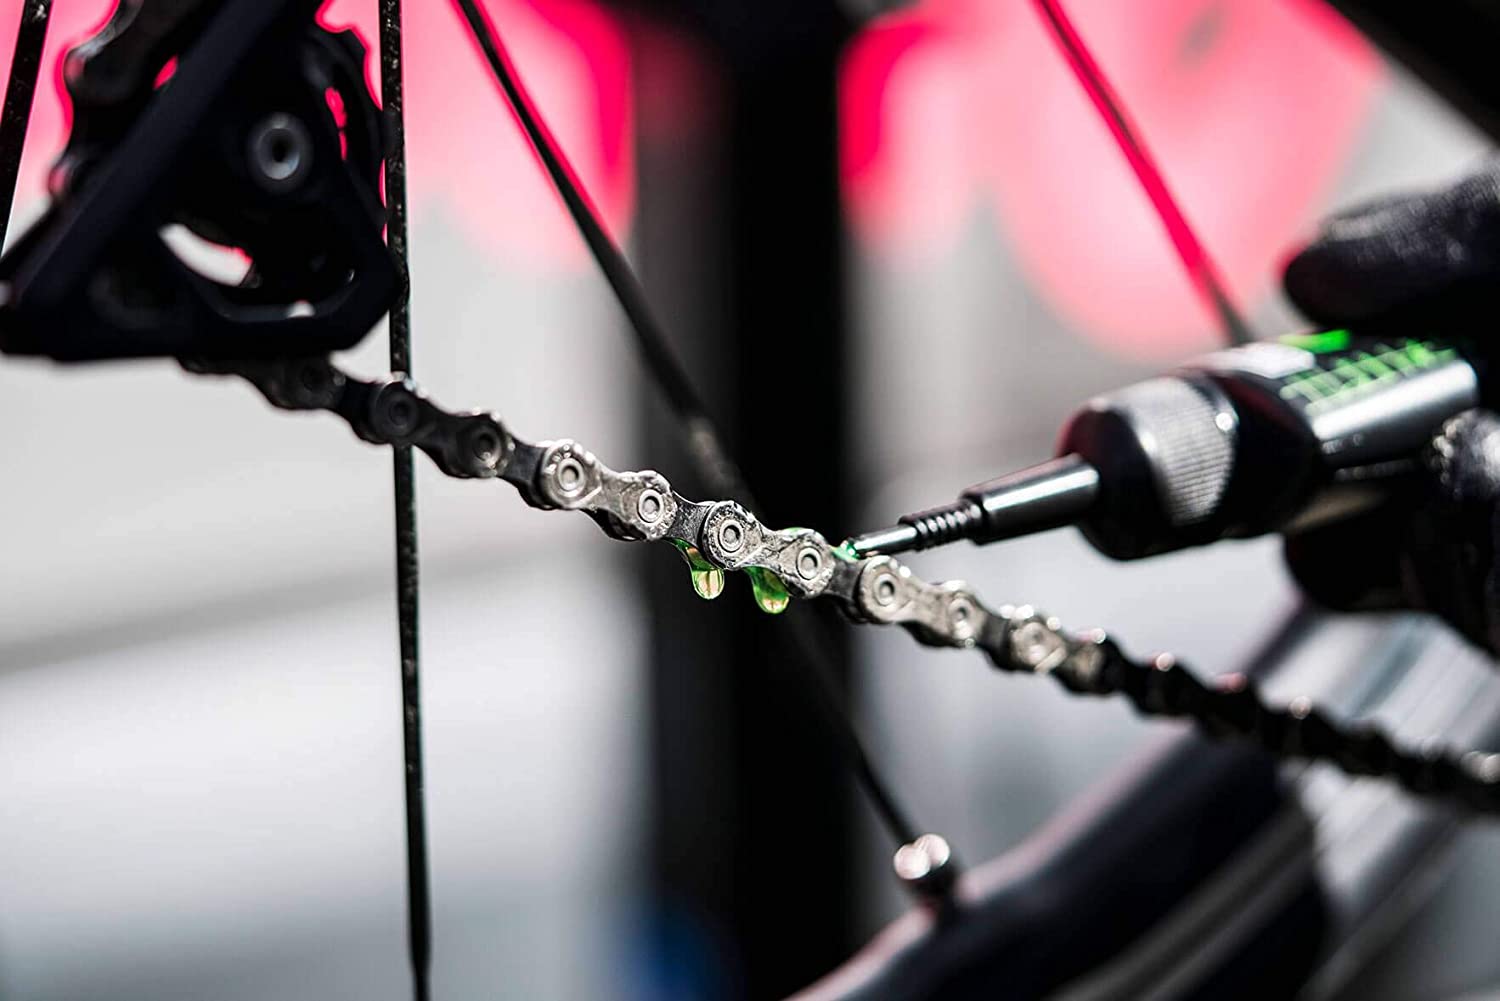 Only apply chain lube to the moving parts to increase the drivetrain’s performance.